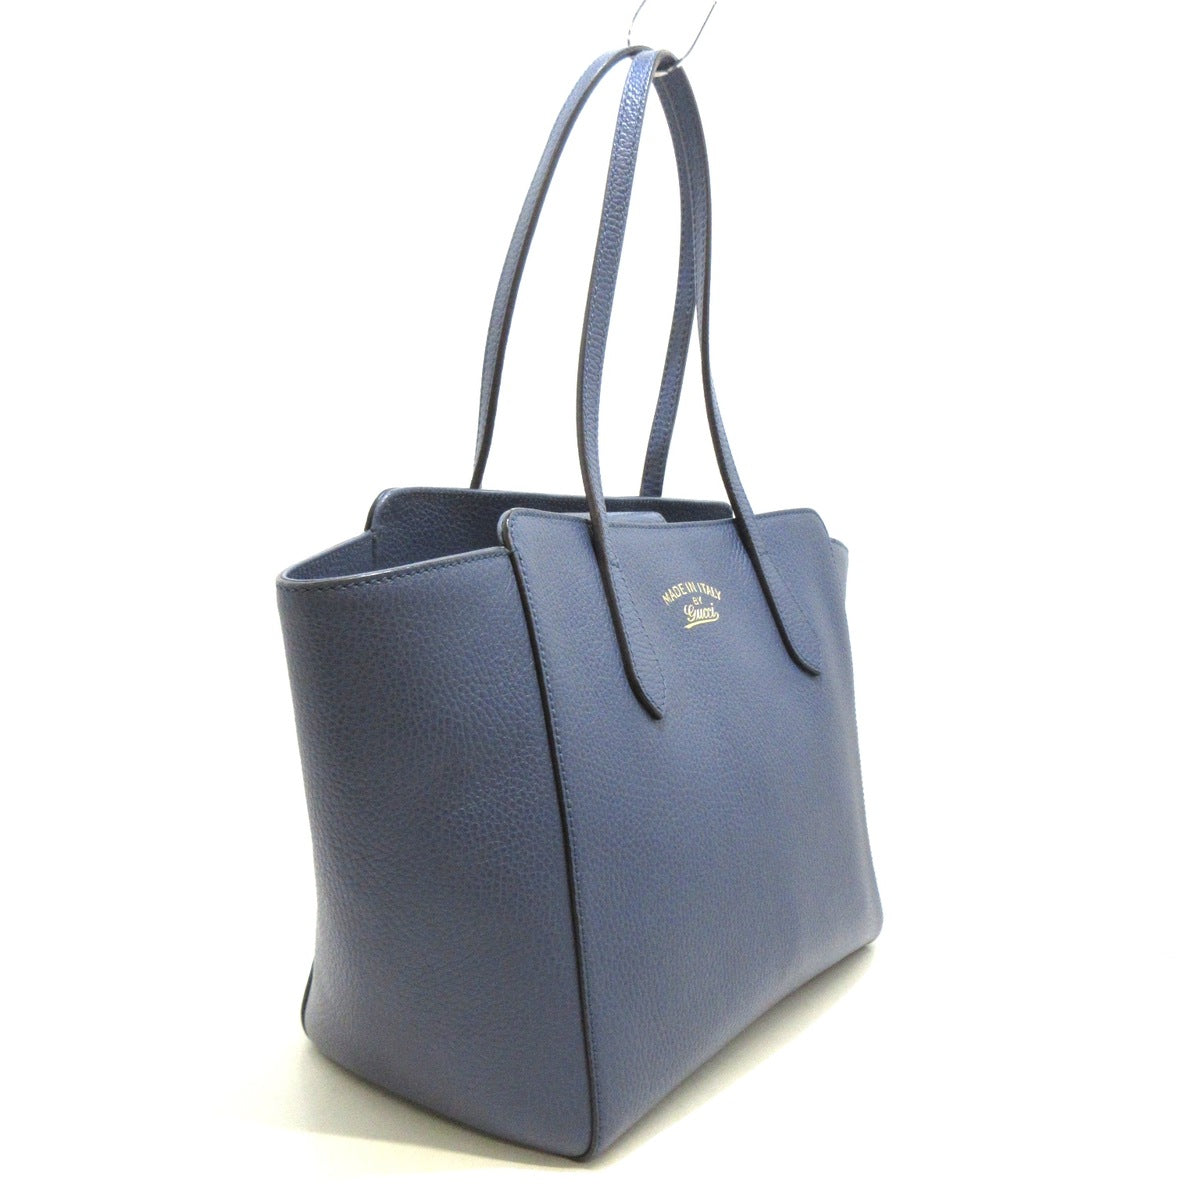 GUCCI - Swing Medium Tote Tote Bag  Navy Leather